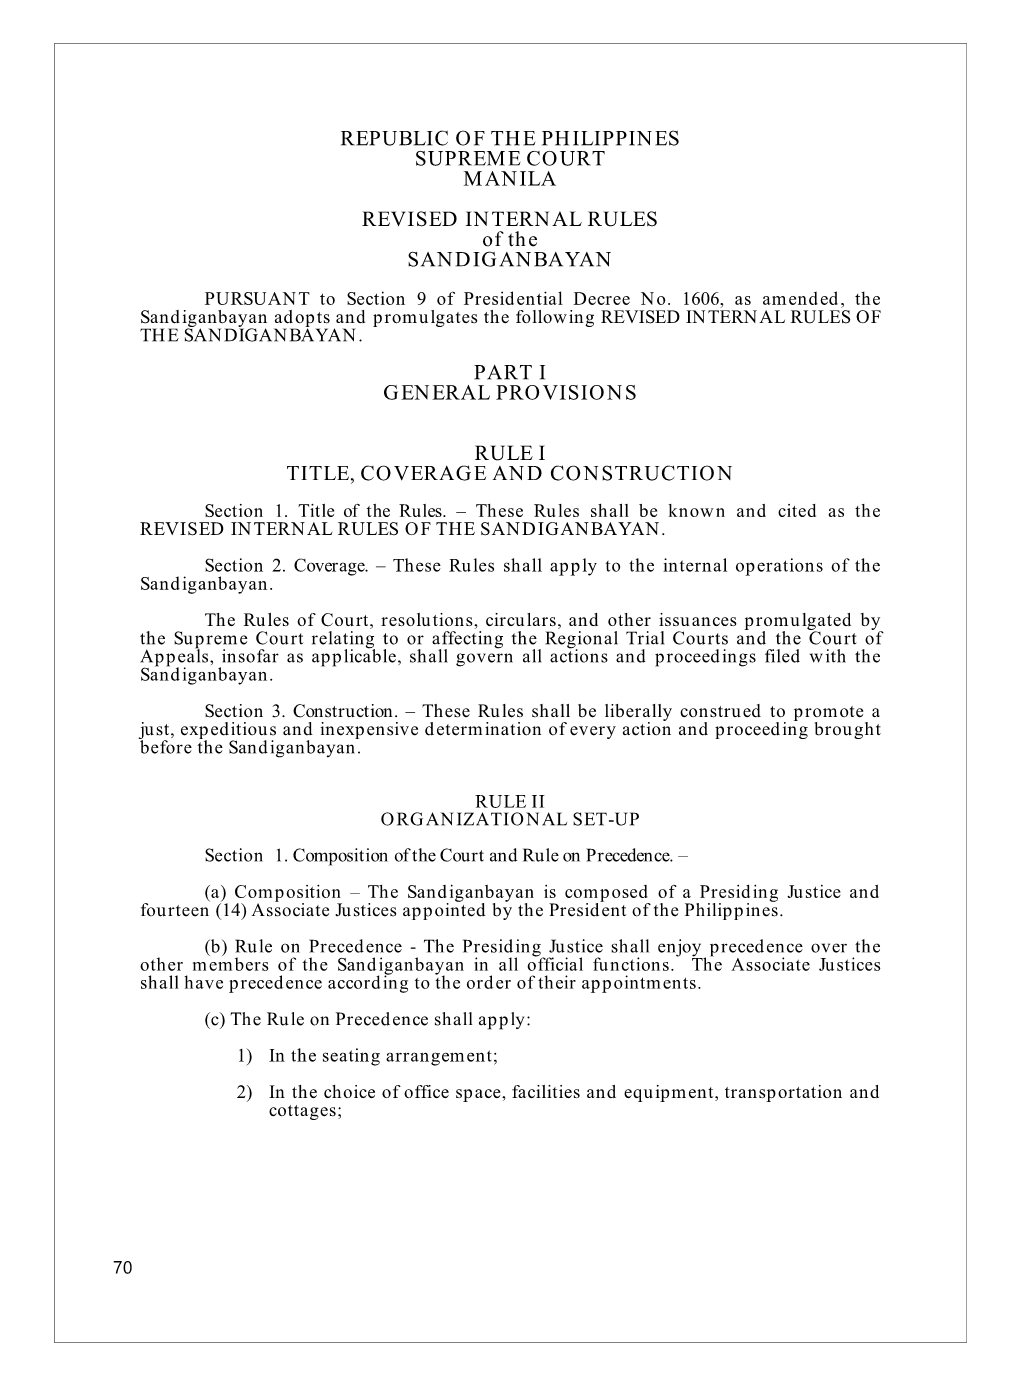 REVISED INTERNAL RULES of the SANDIGANBAYAN